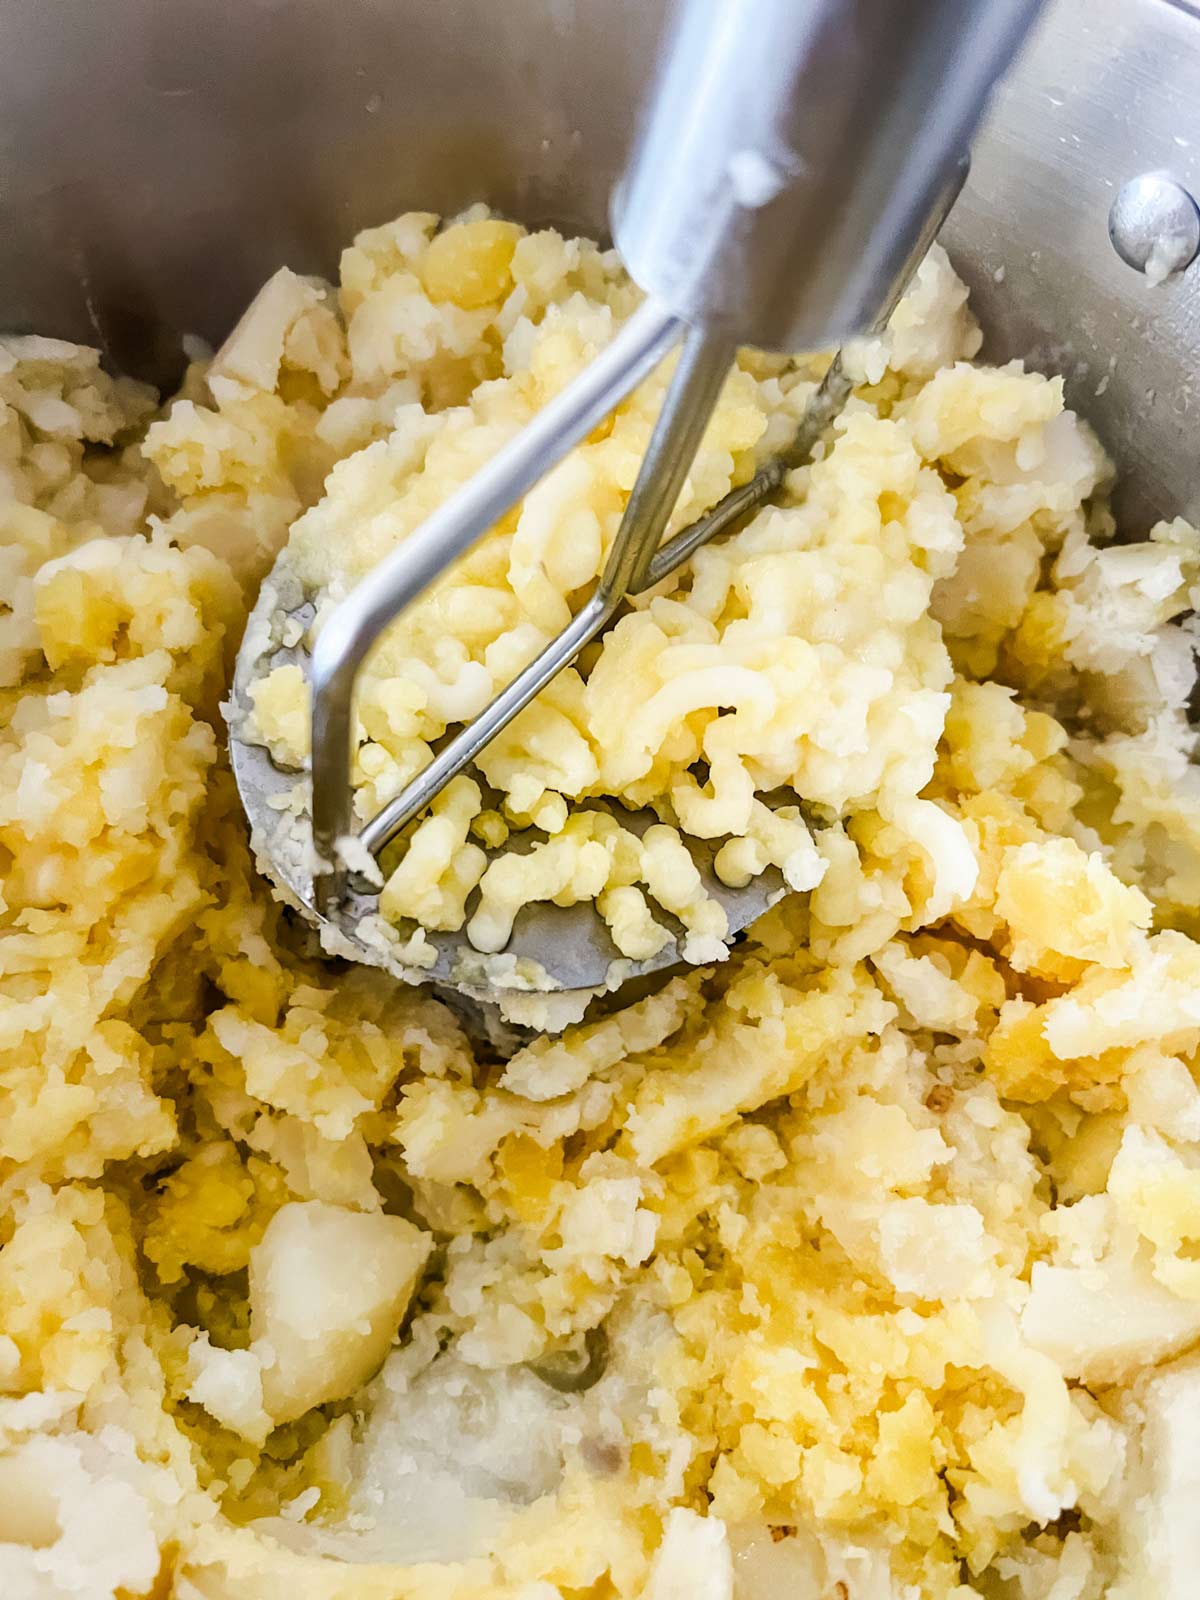 Potatoes being mashed with a potato masher.